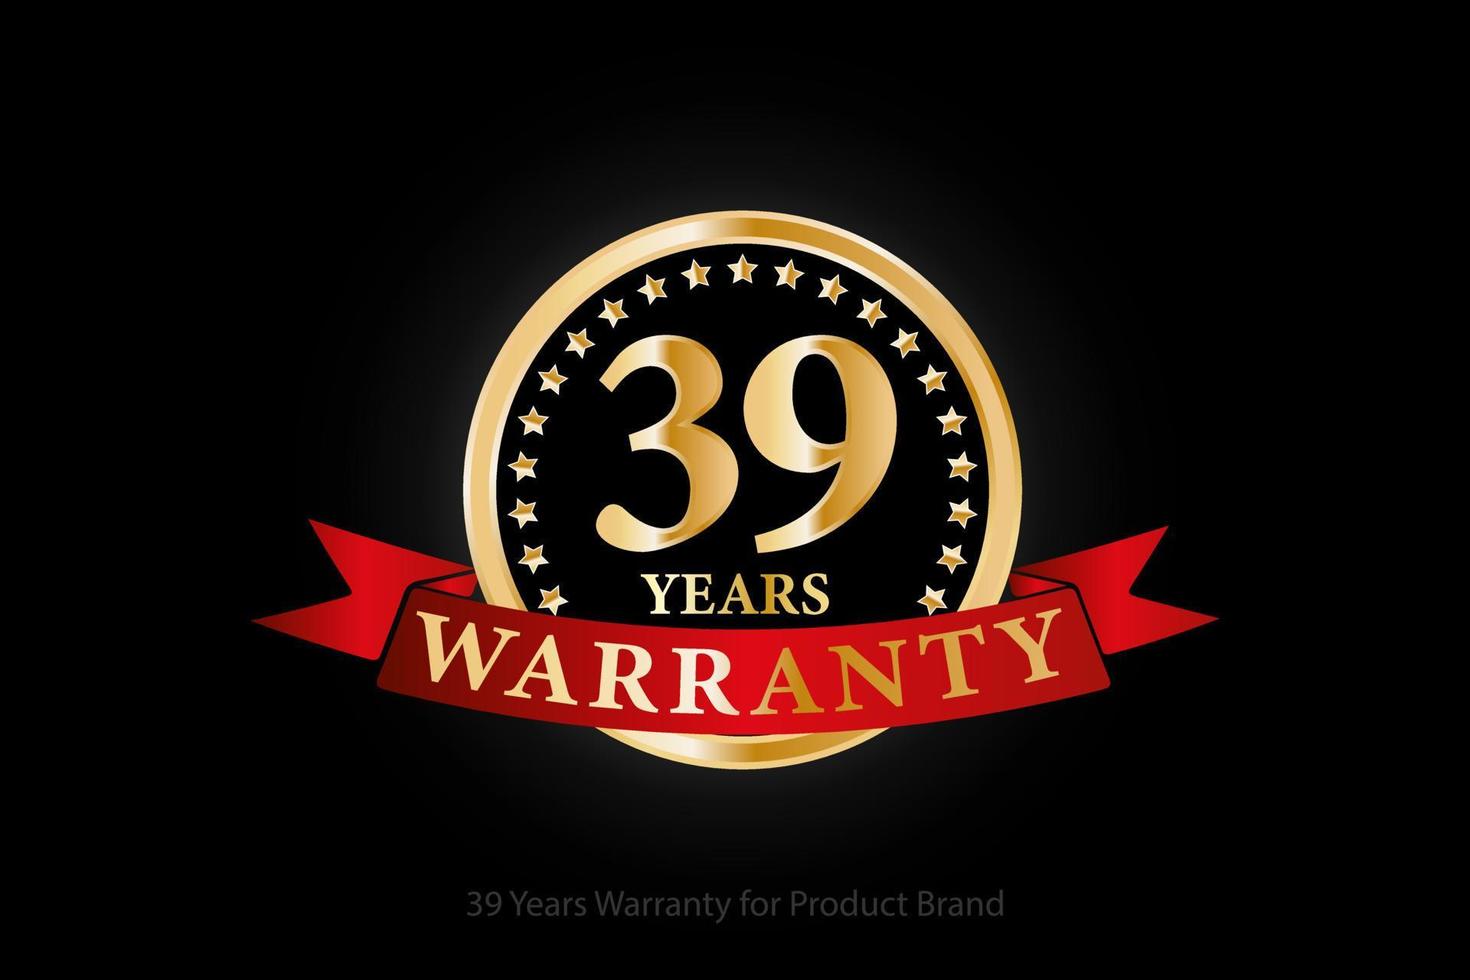 39 years golden warranty logo with ring and red ribbon isolated on black background, vector design for product warranty, guarantee, service, corporate, and your business.